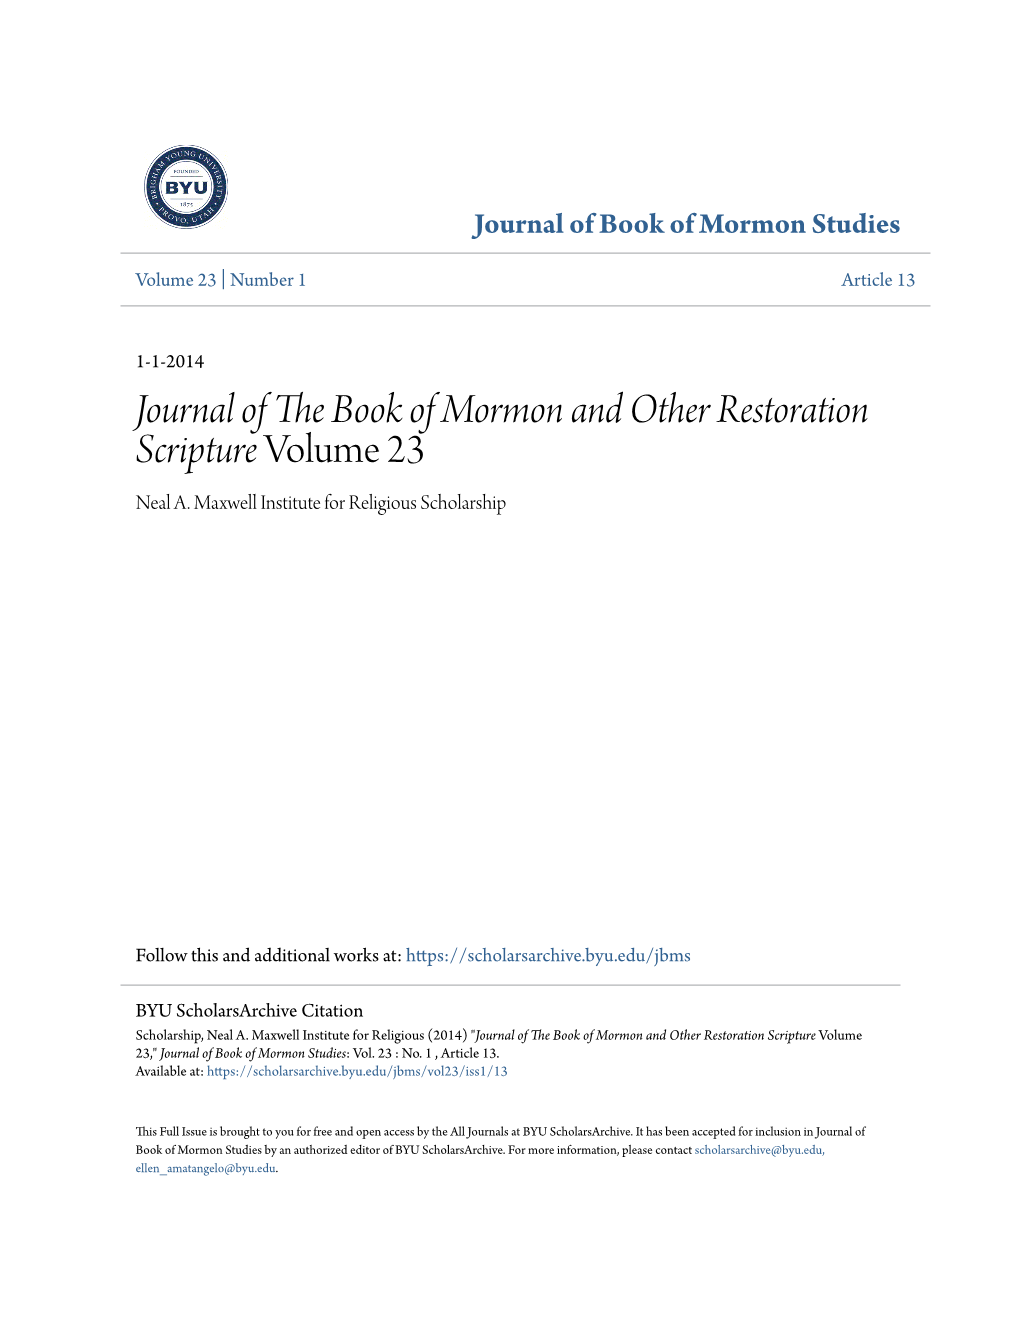 Journal of the Book of Mormon and Other Restoration Scripture Volume 23 Neal A